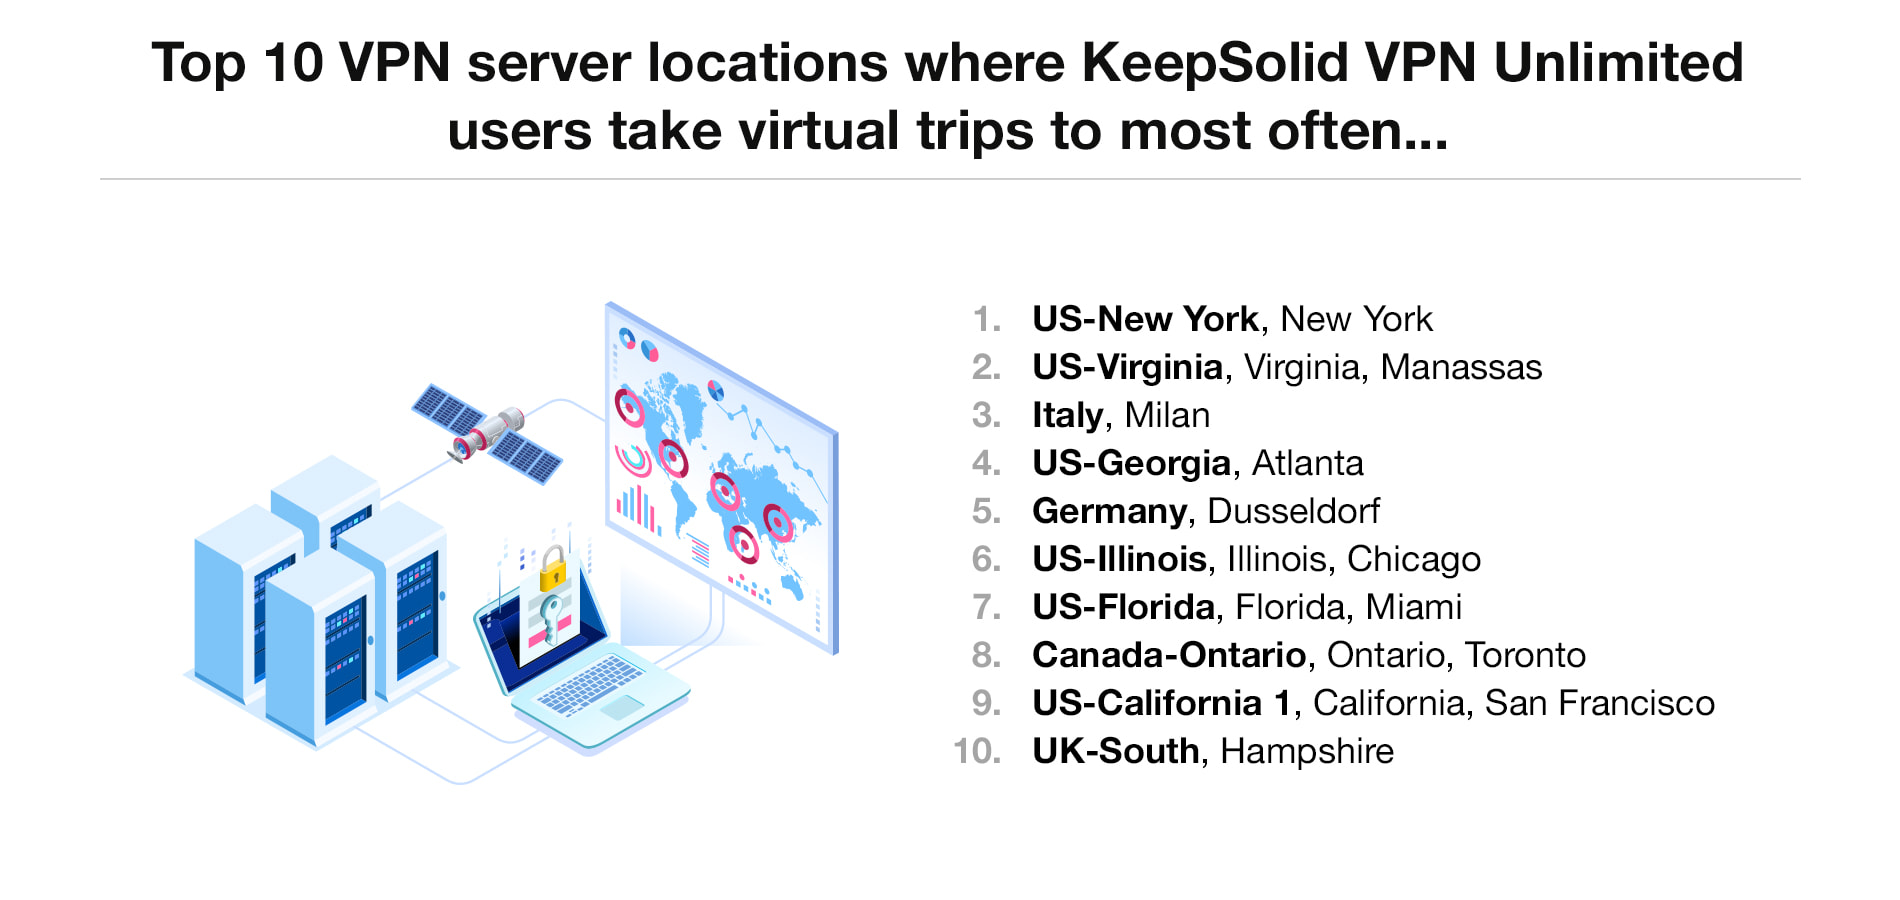 Top 10 VPN server locations where KeepSolid VPN Unlimited